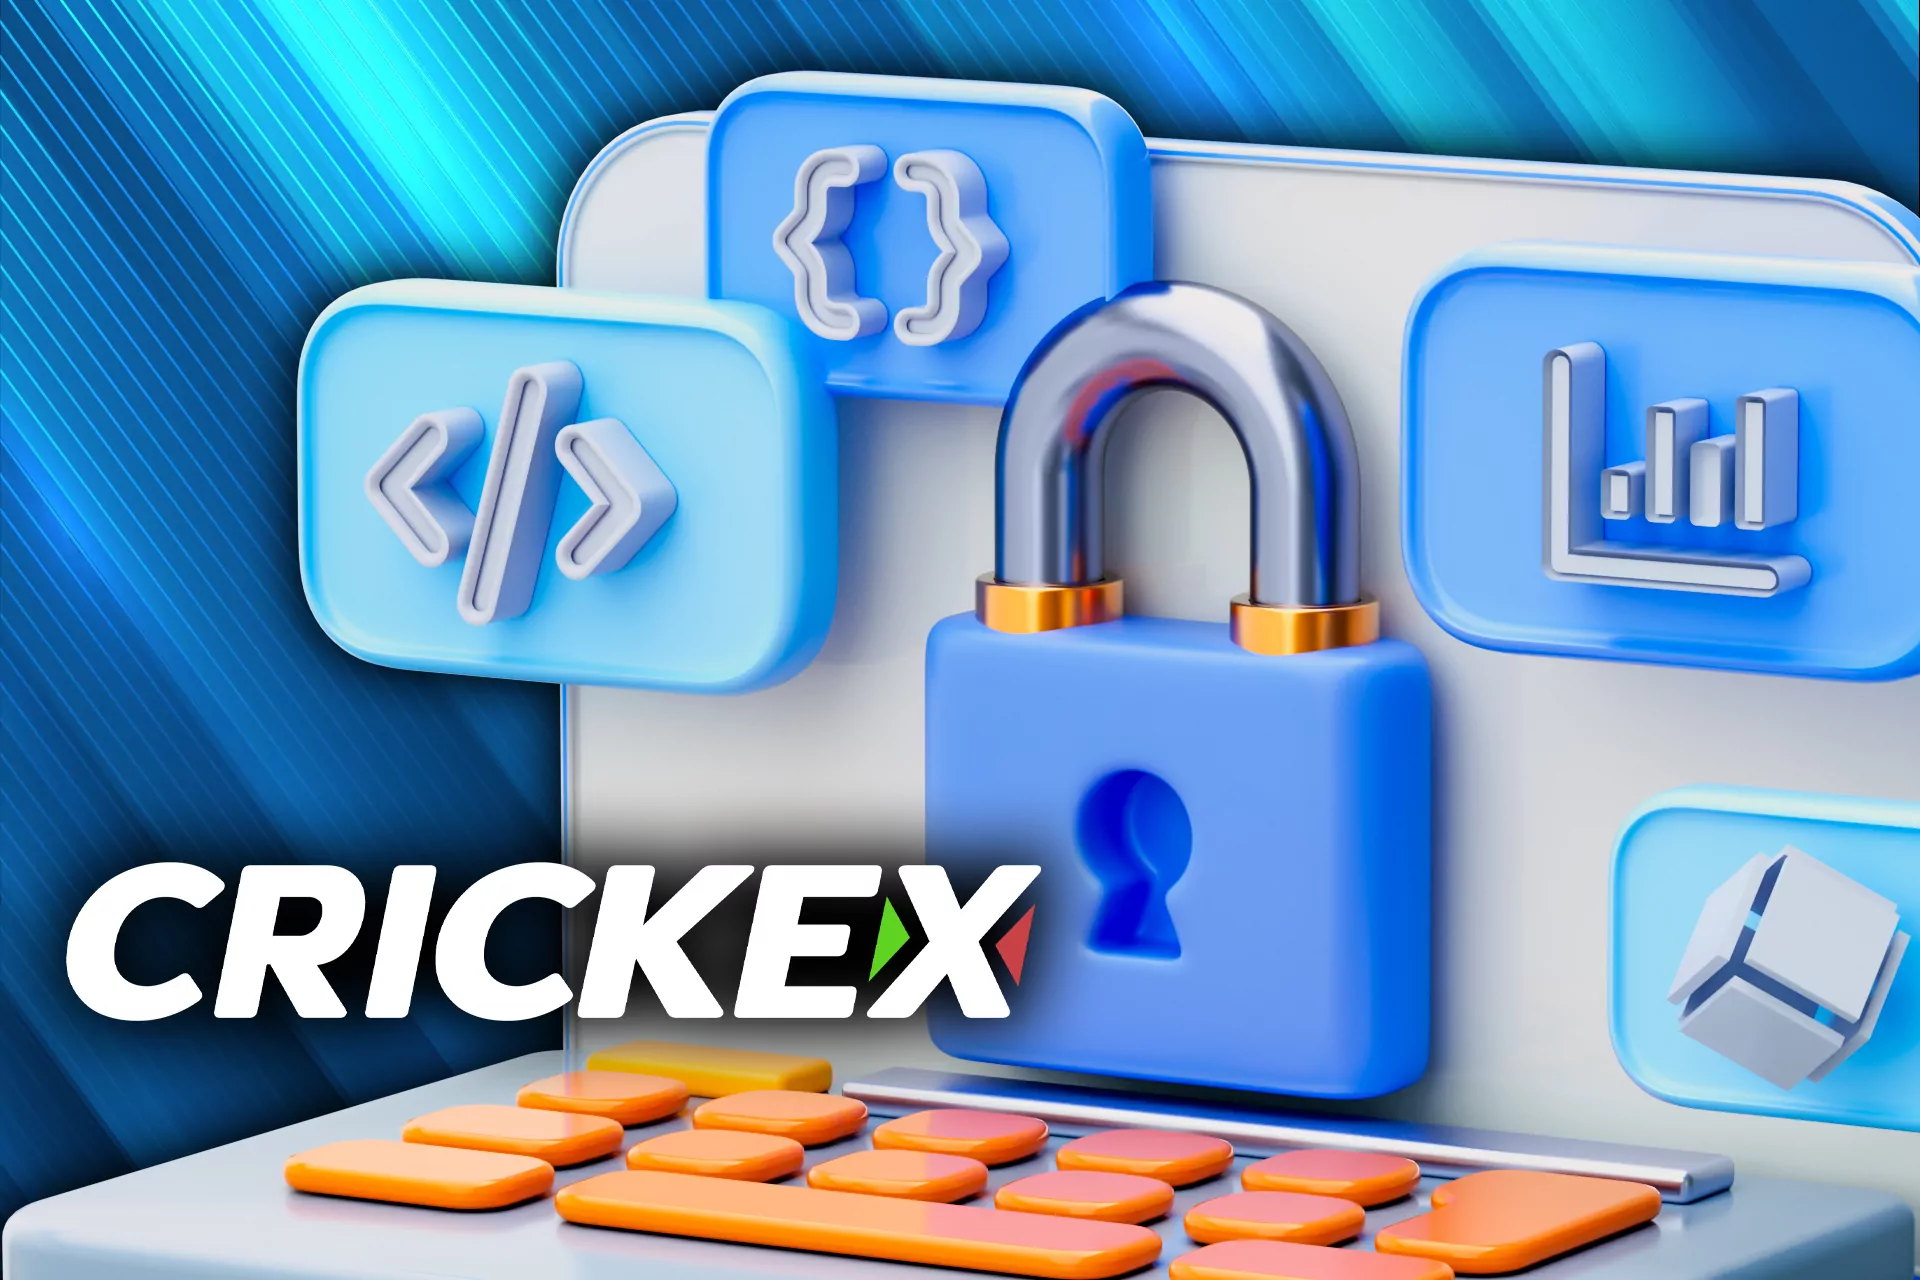 All the users data on the Crickex site is encrypted.